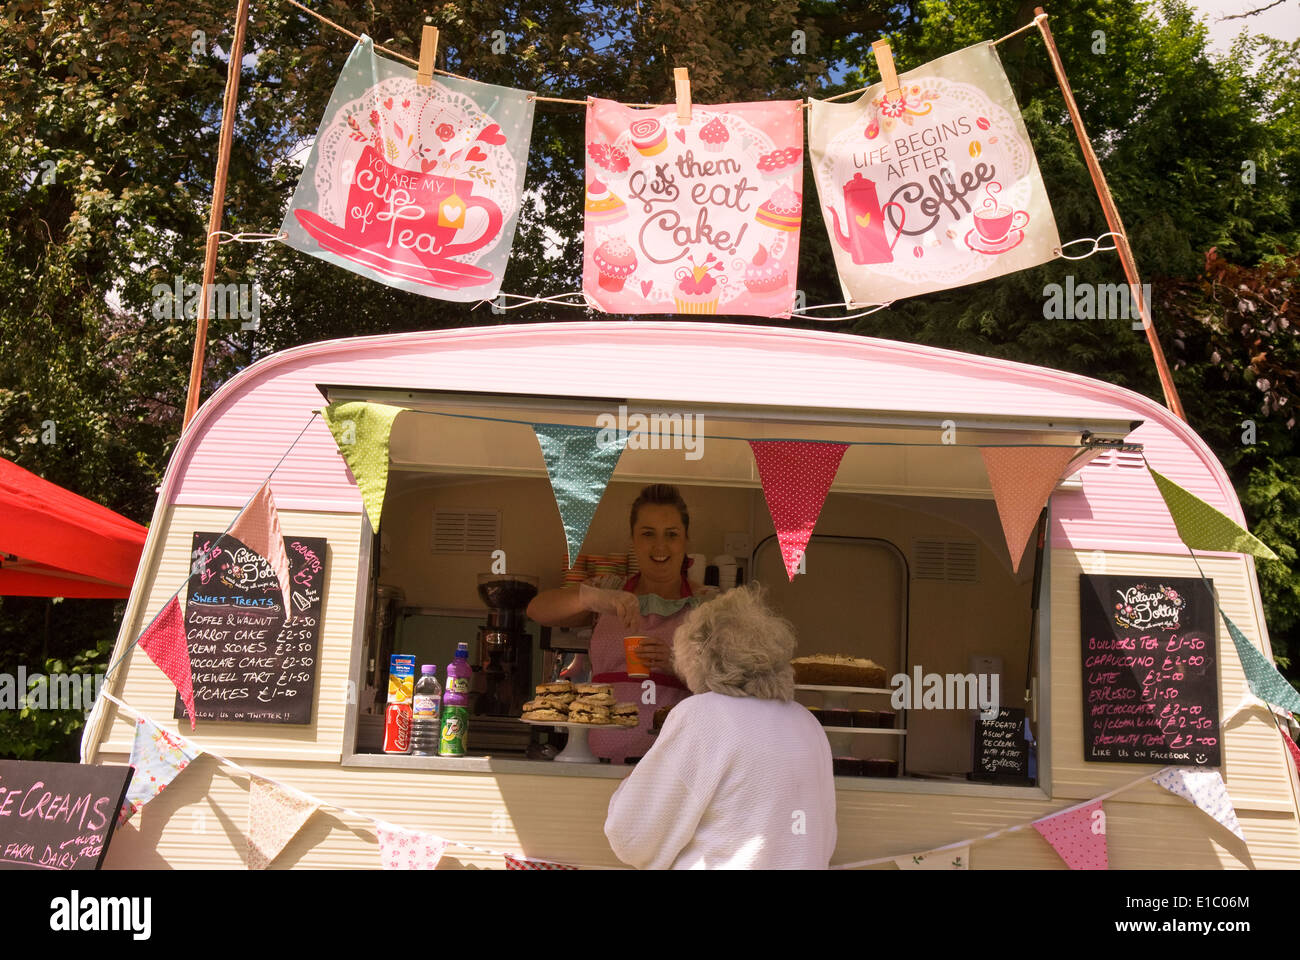 Retro catering caravan from c1960s at a classic car show, Haslemere, Surrey, UK. Stock Photo